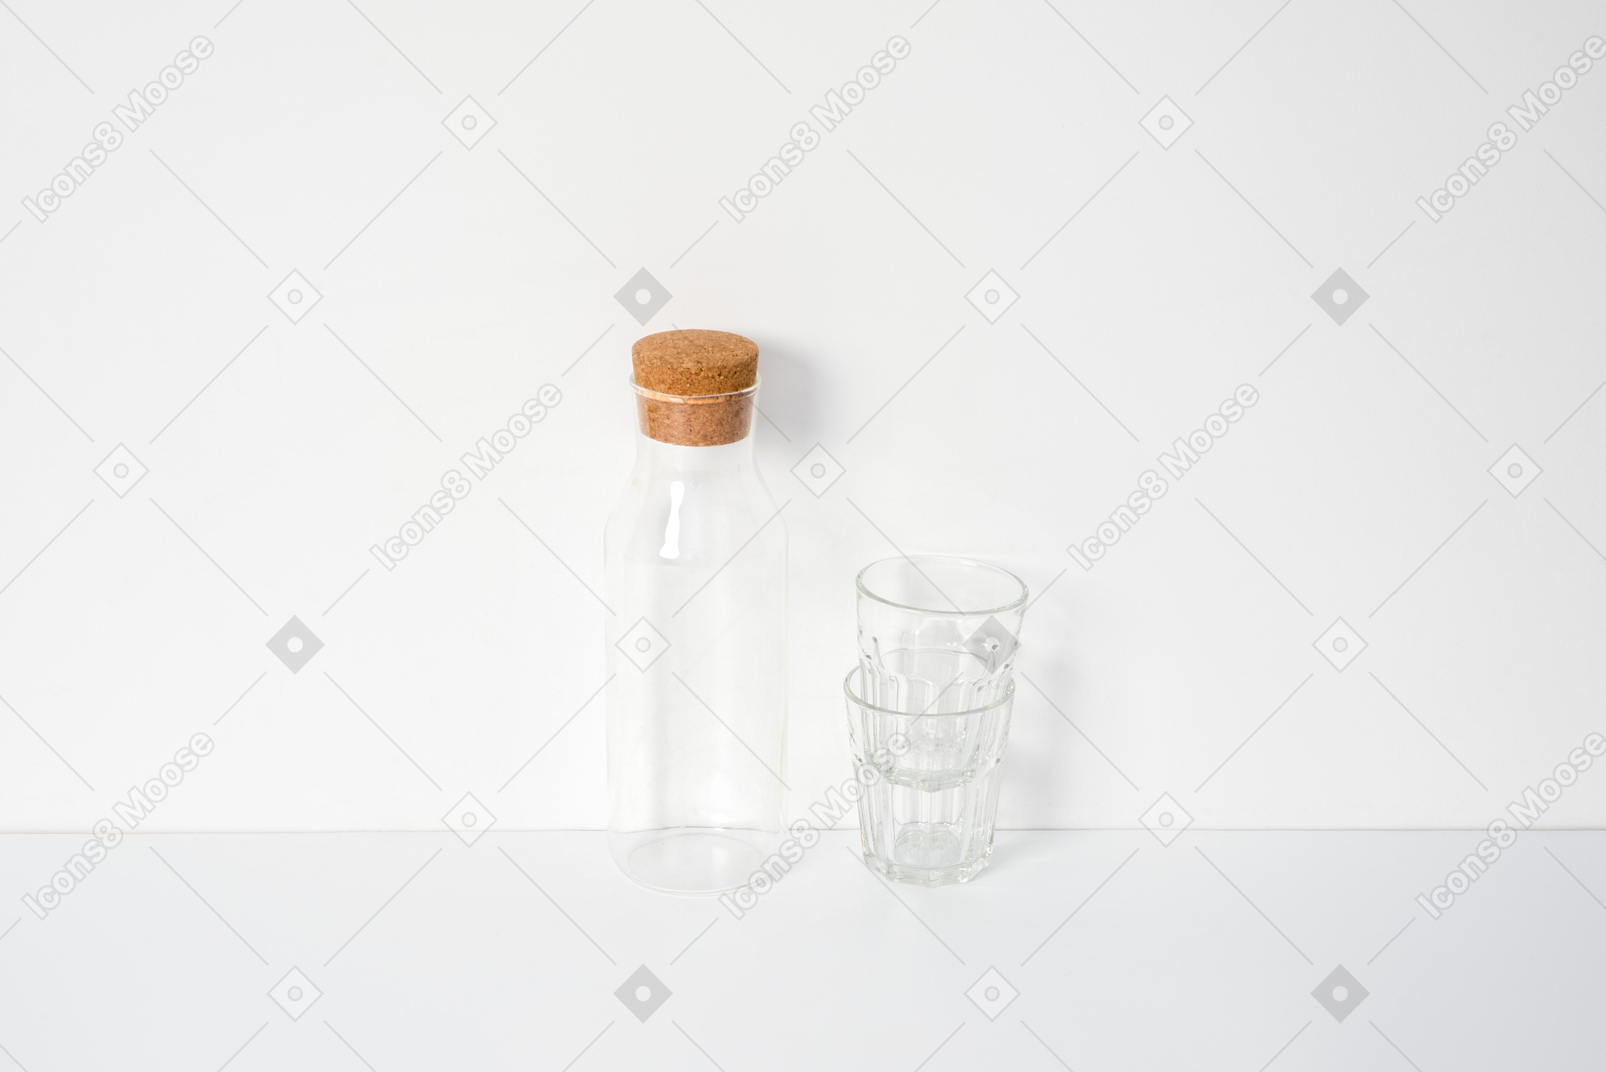 Empty bottle with two glasses